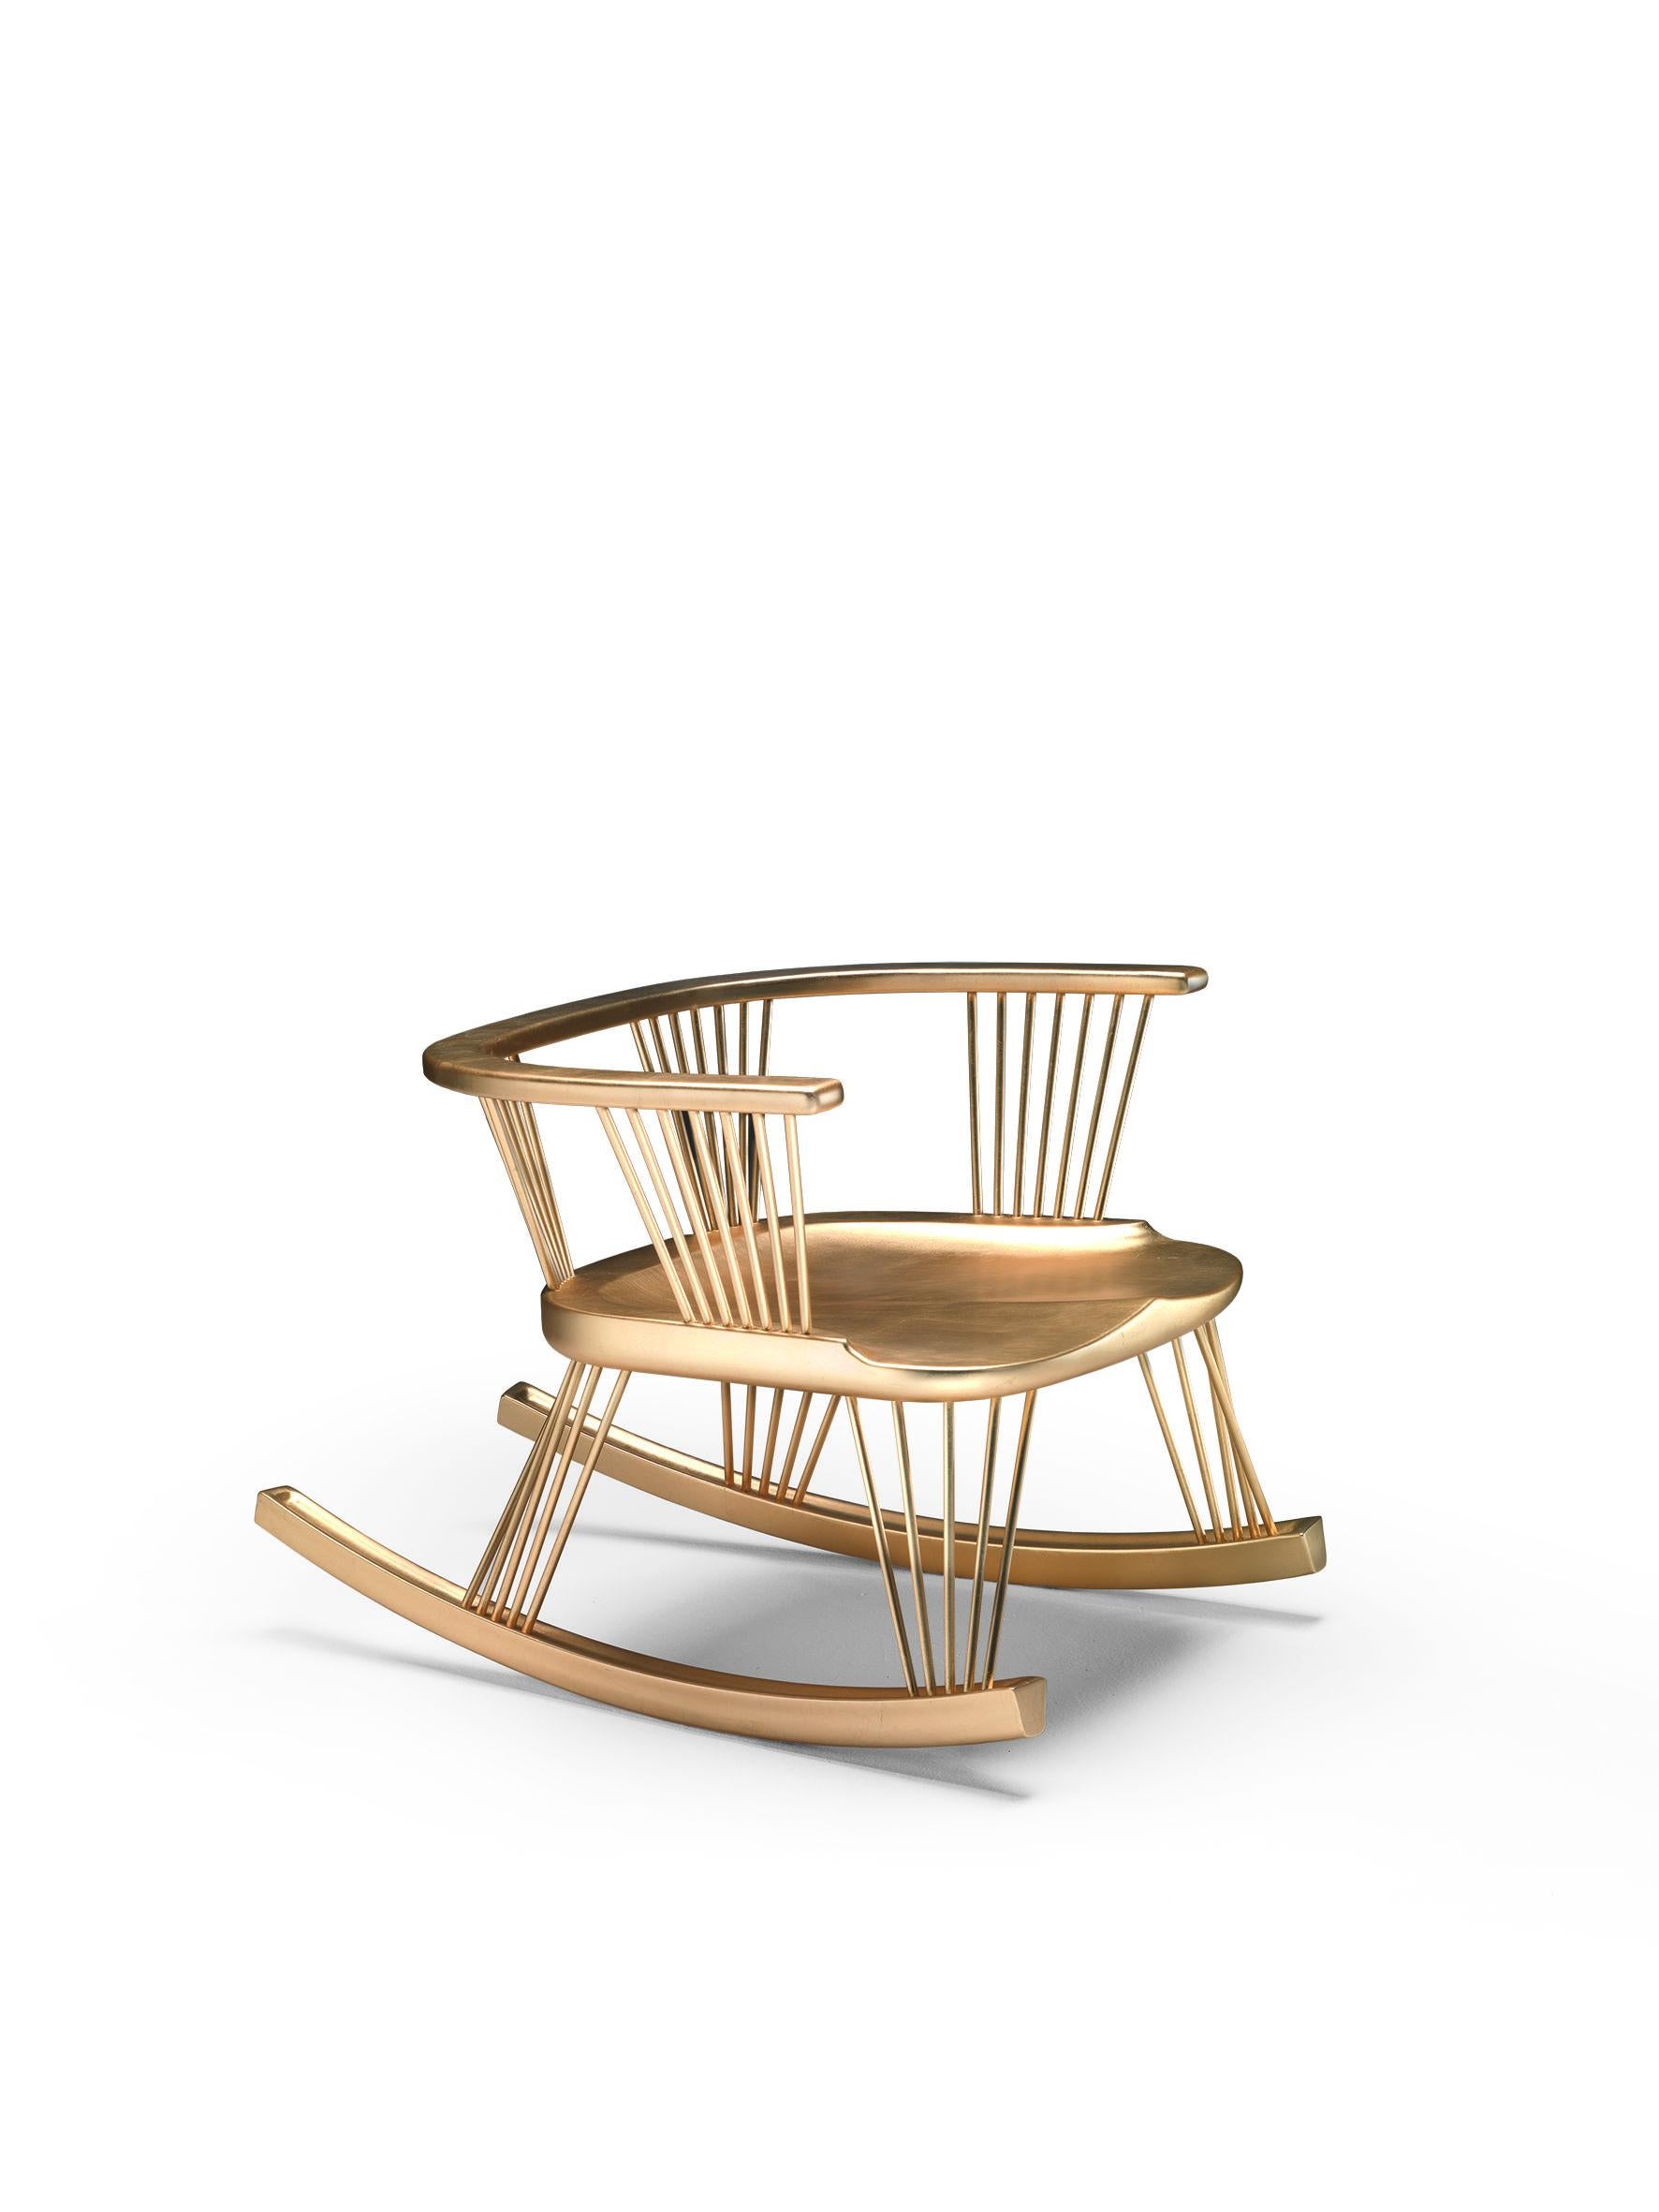 Contemporary SITLALI Low Rocking Chair in Solid Wood and Thin Overlapping Road and Gold Leaf For Sale